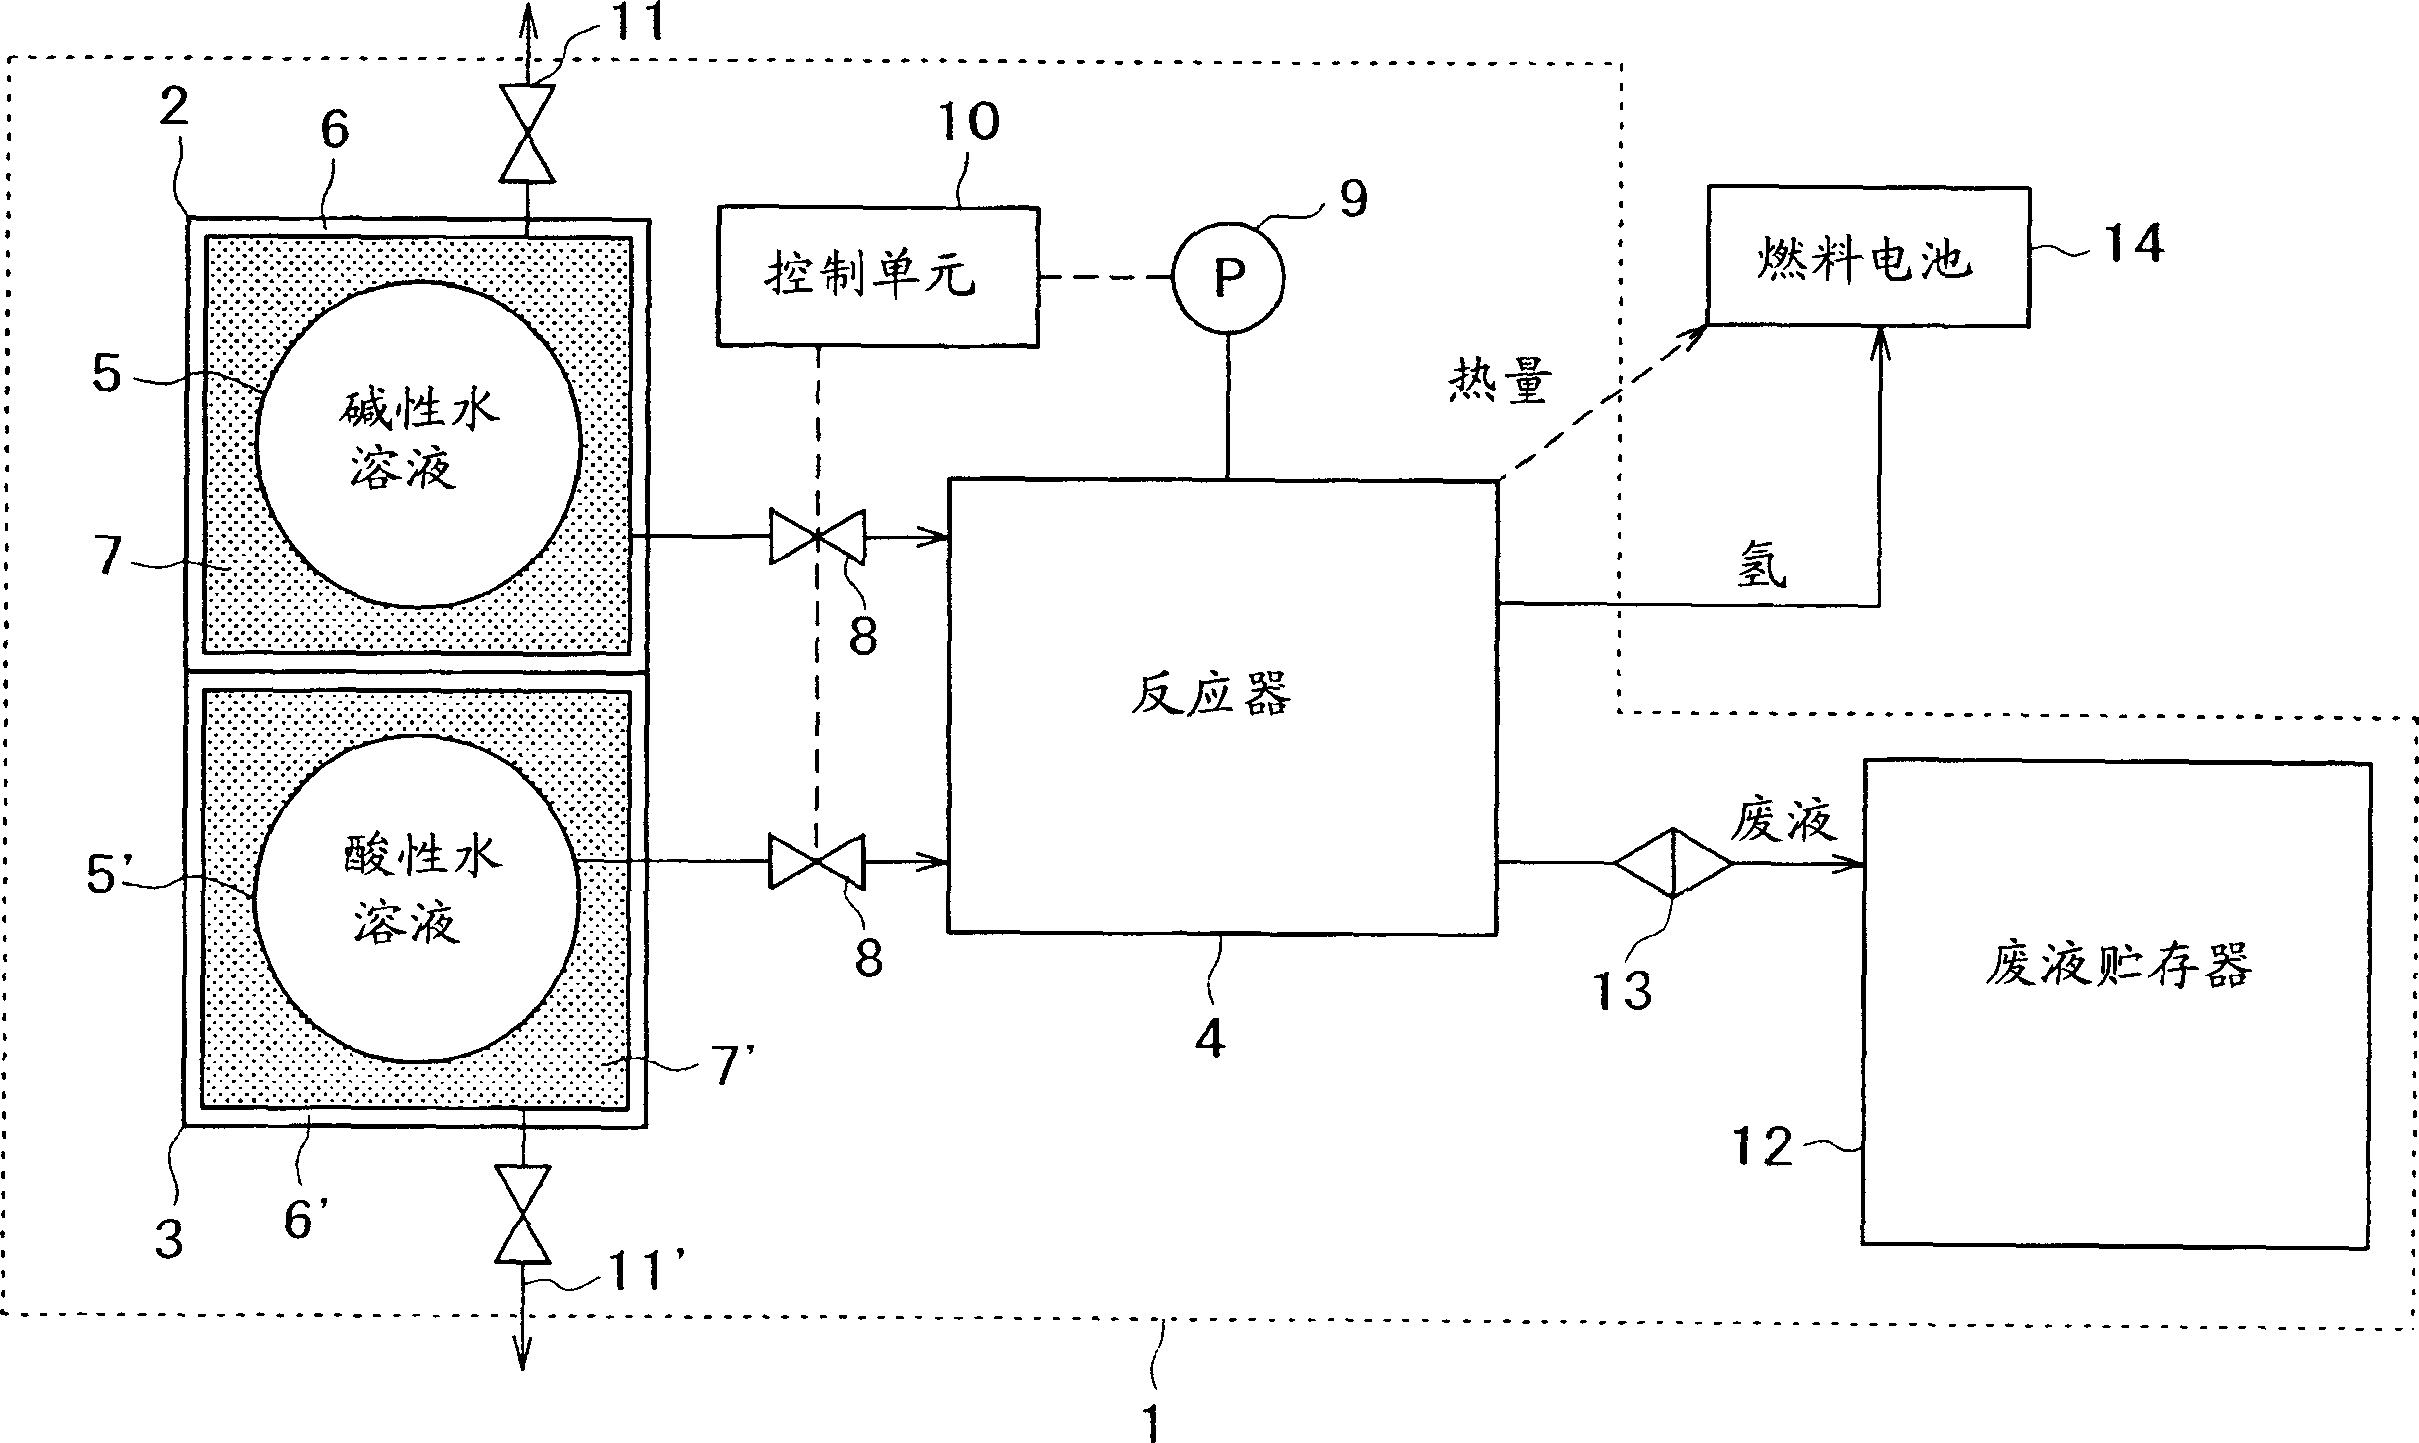 Method of generating hydrogen gas, hydrogen gas production apparatus and energy conversion system